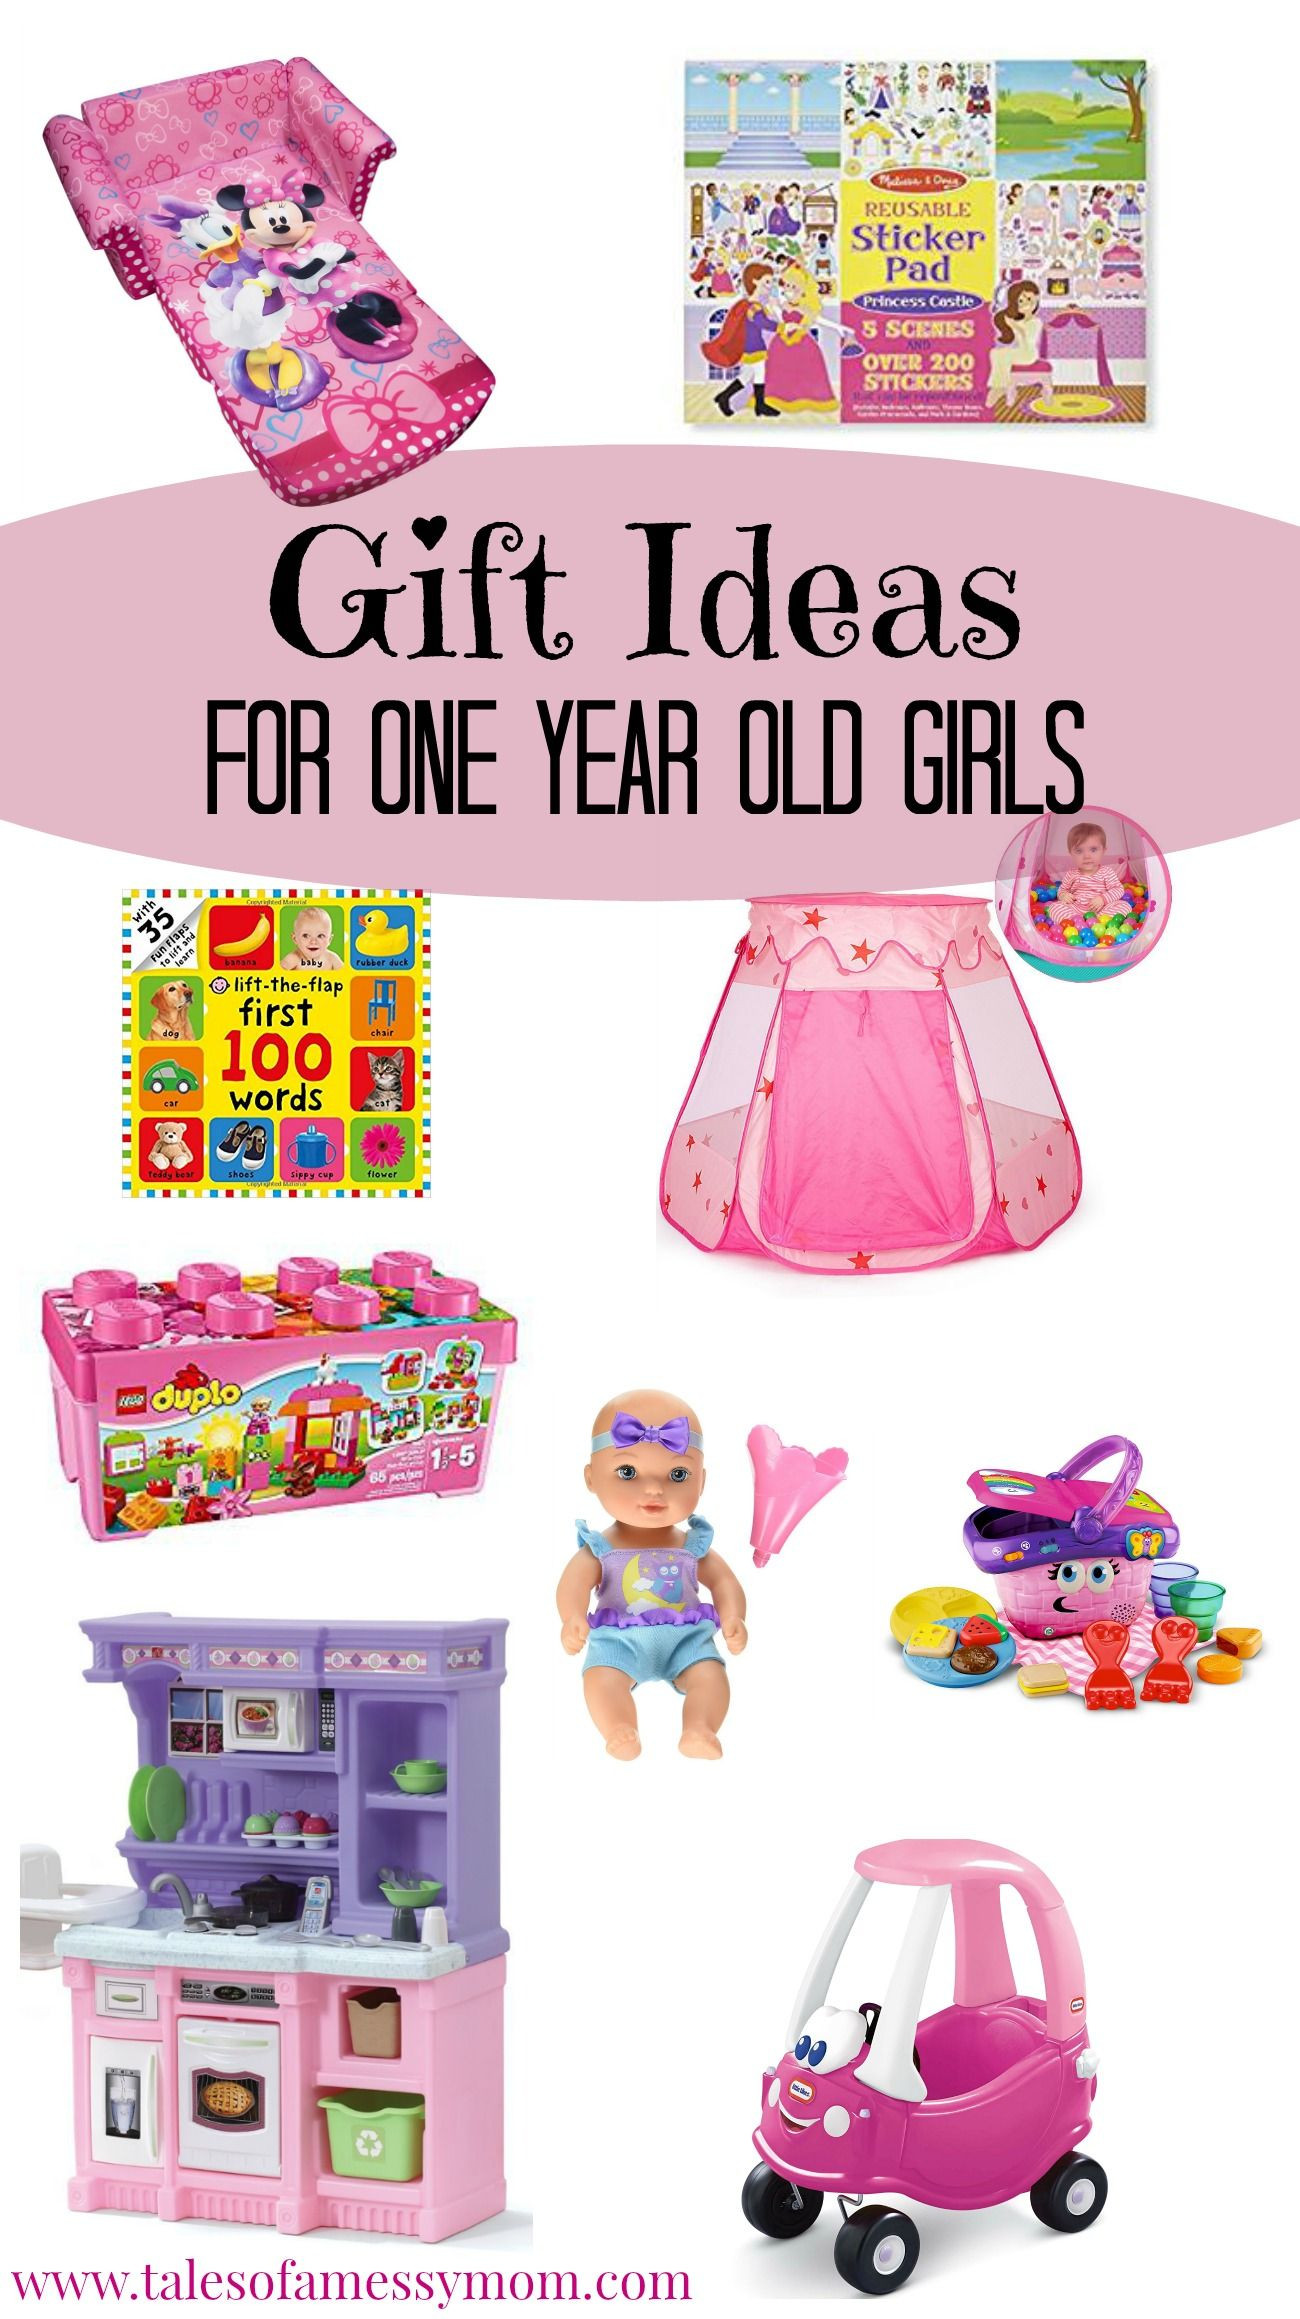 Baby Girl One Year Old Gift Ideas
 Gift Ideas for e Year Old Girls